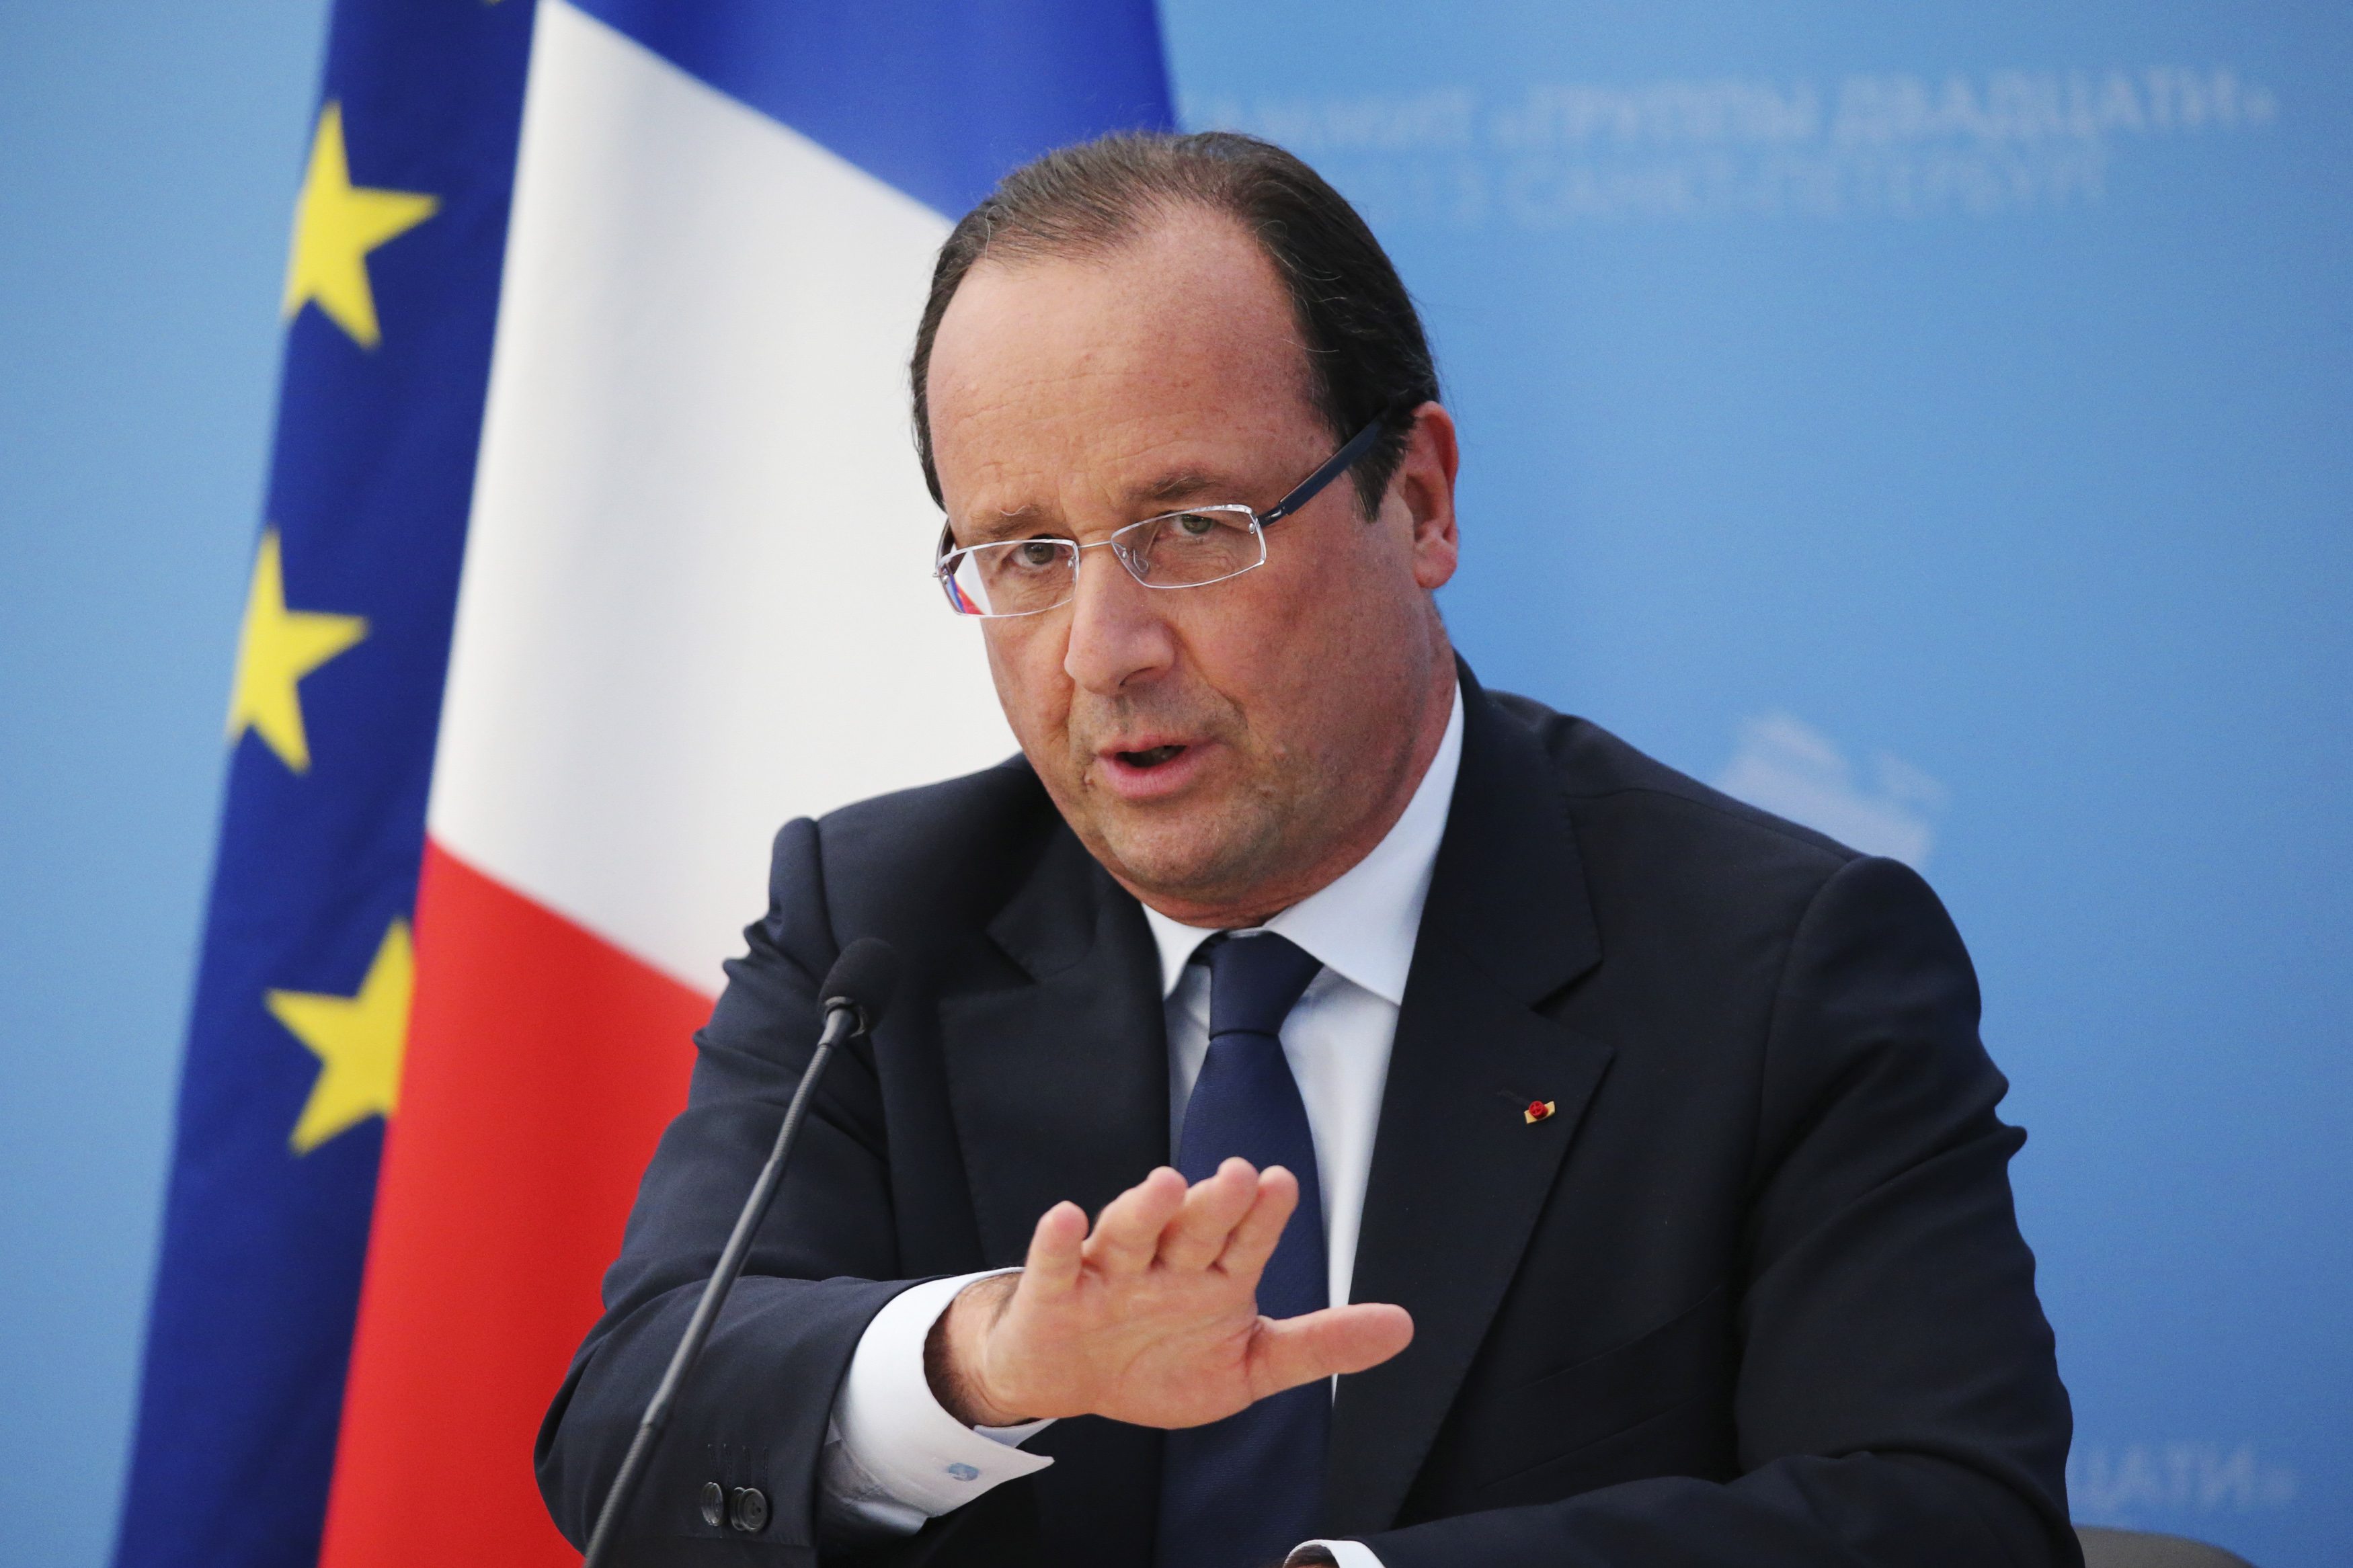 French President Hollande speaks to the media during a news conference at the G20 summit in St. Petersburg